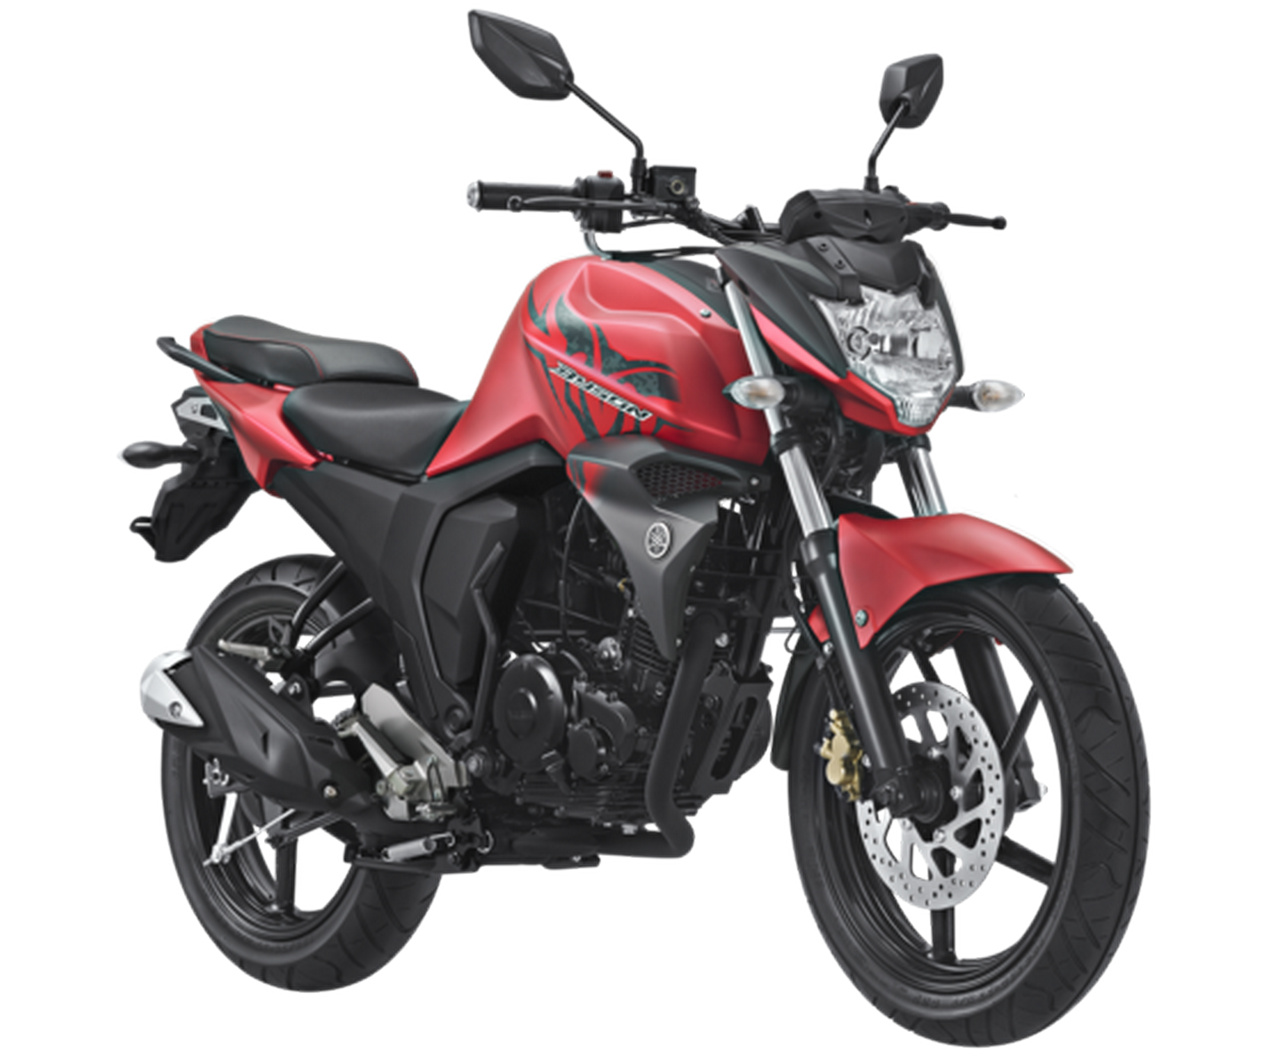  2017  Yamaha  Byson  FI updated in Indonesia